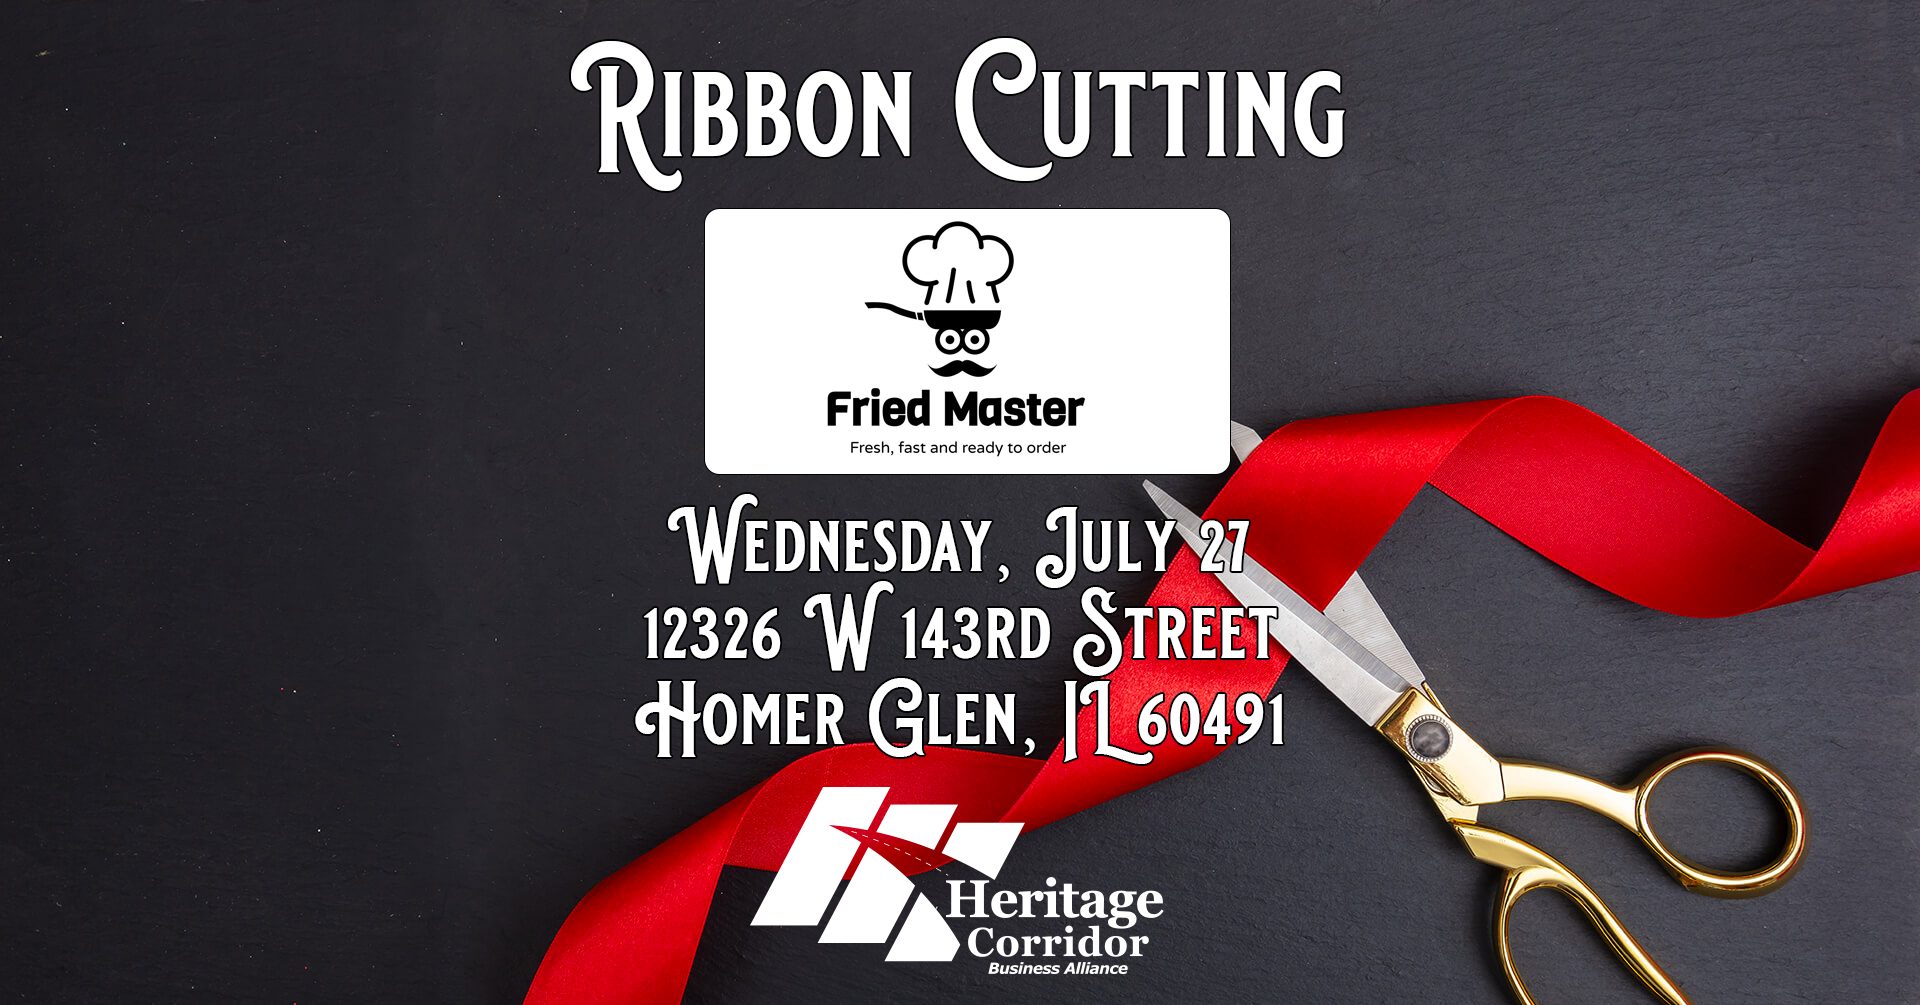 Ribbon Cutting with Scissors. Fried Master logo.